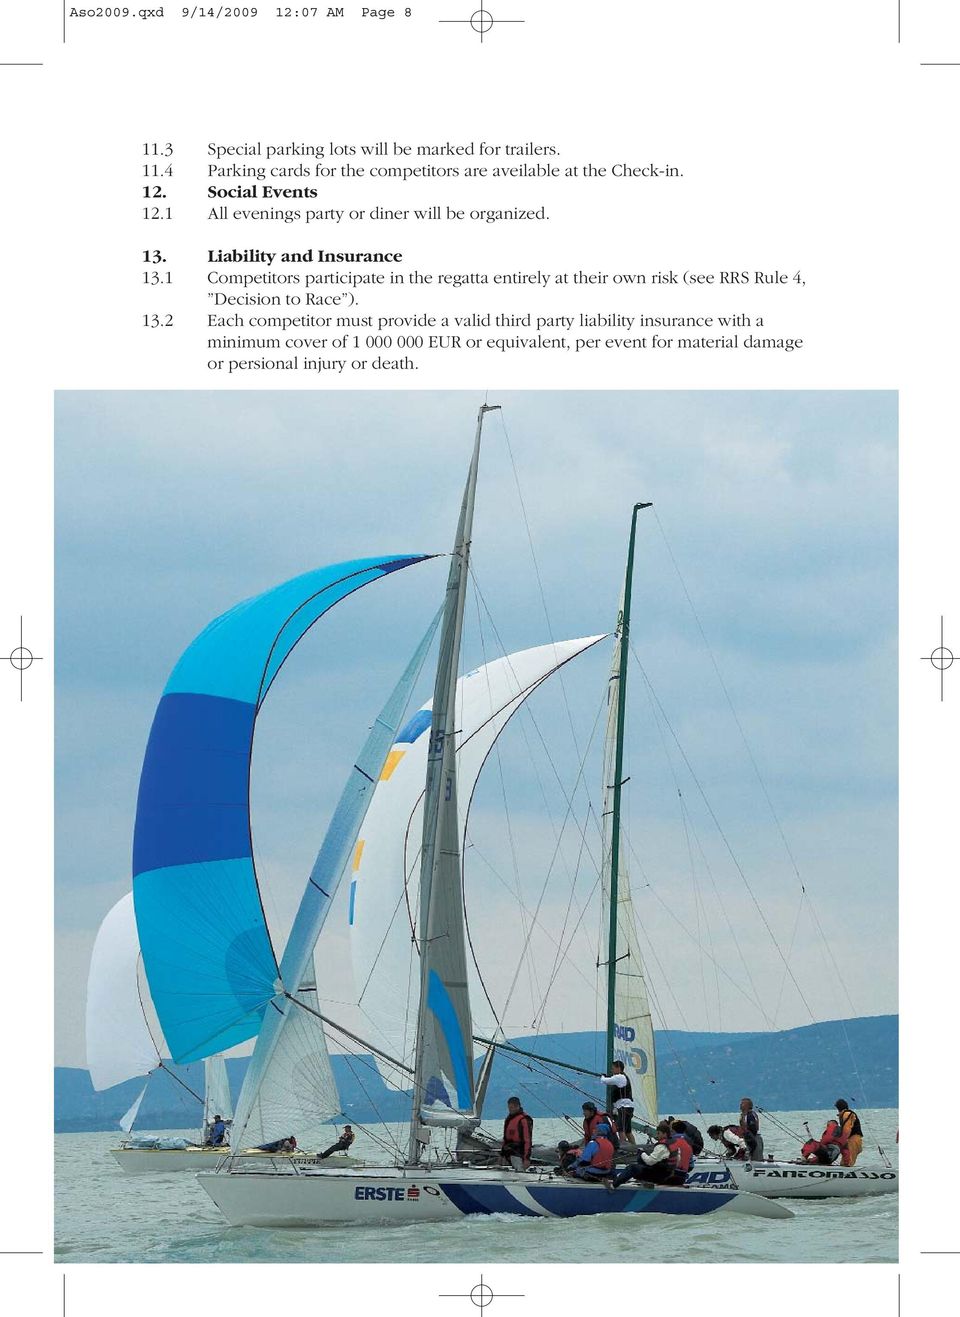 1 Competitors participate in the regatta entirely at their own risk (see RRS Rule 4, Decision to Race ). 13.